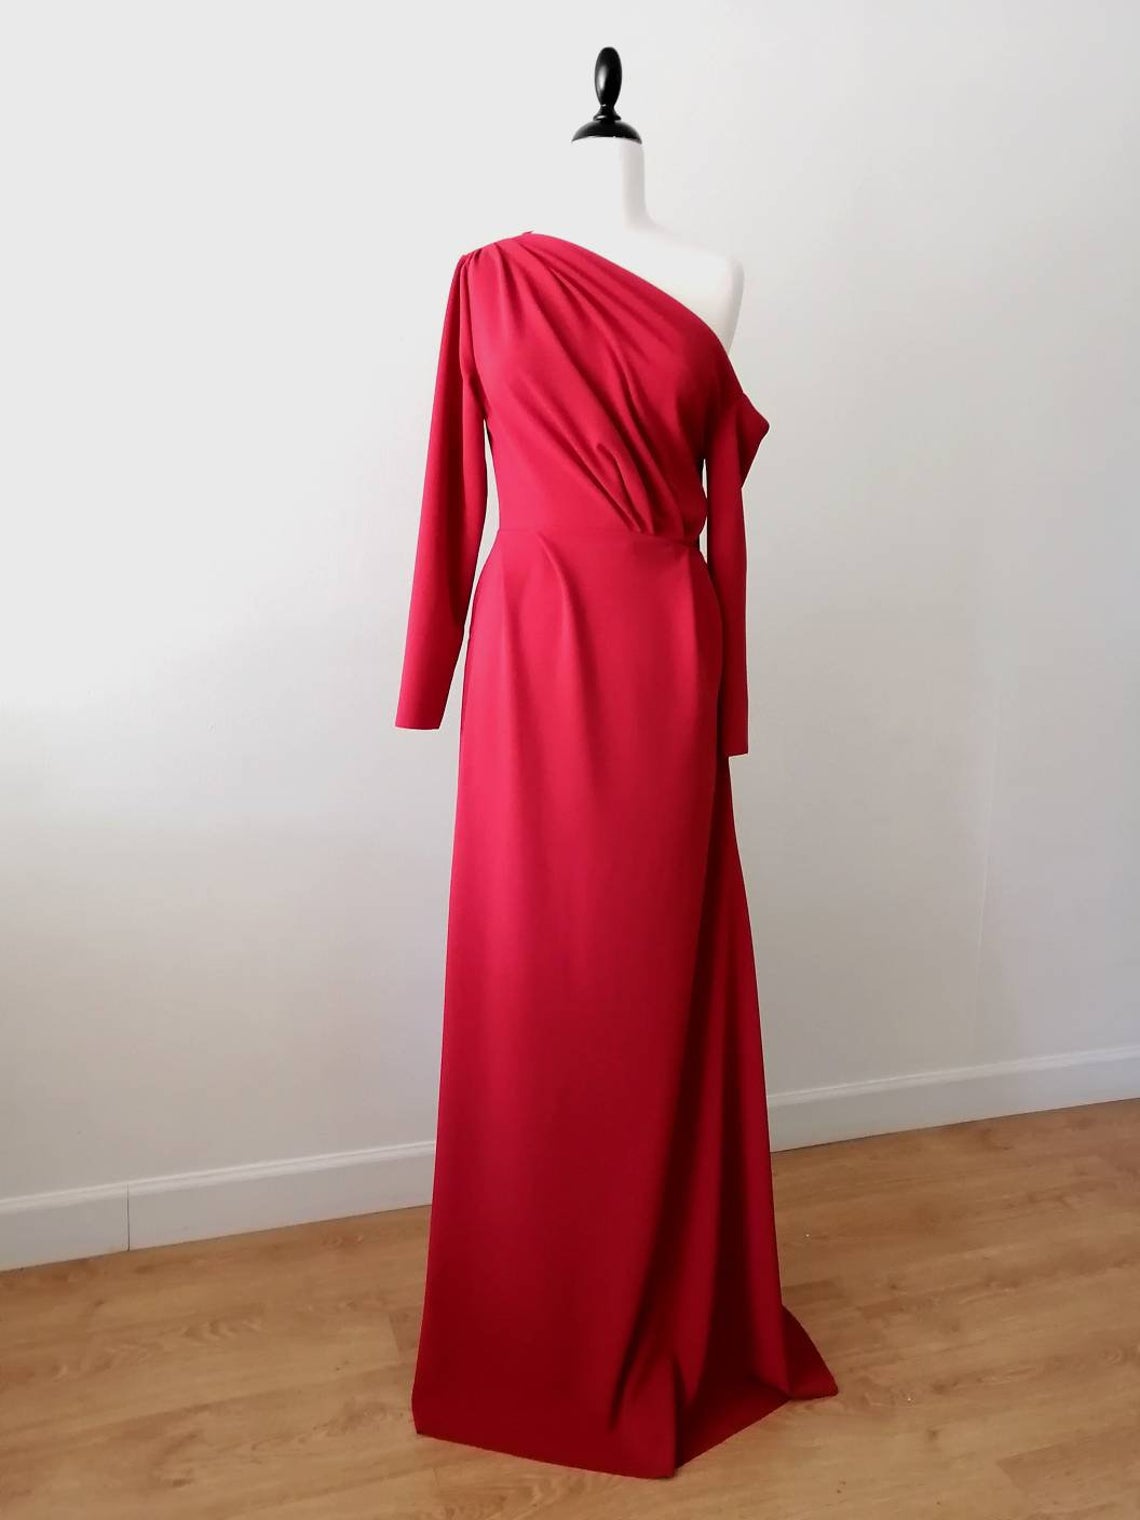 Off Shoulders Long Sleeve Valentines Evening Dress With, Minimalist Red Dress, Draped Simple Evening Gown , Ball Gown, Prom Dress, Evening,pl2713